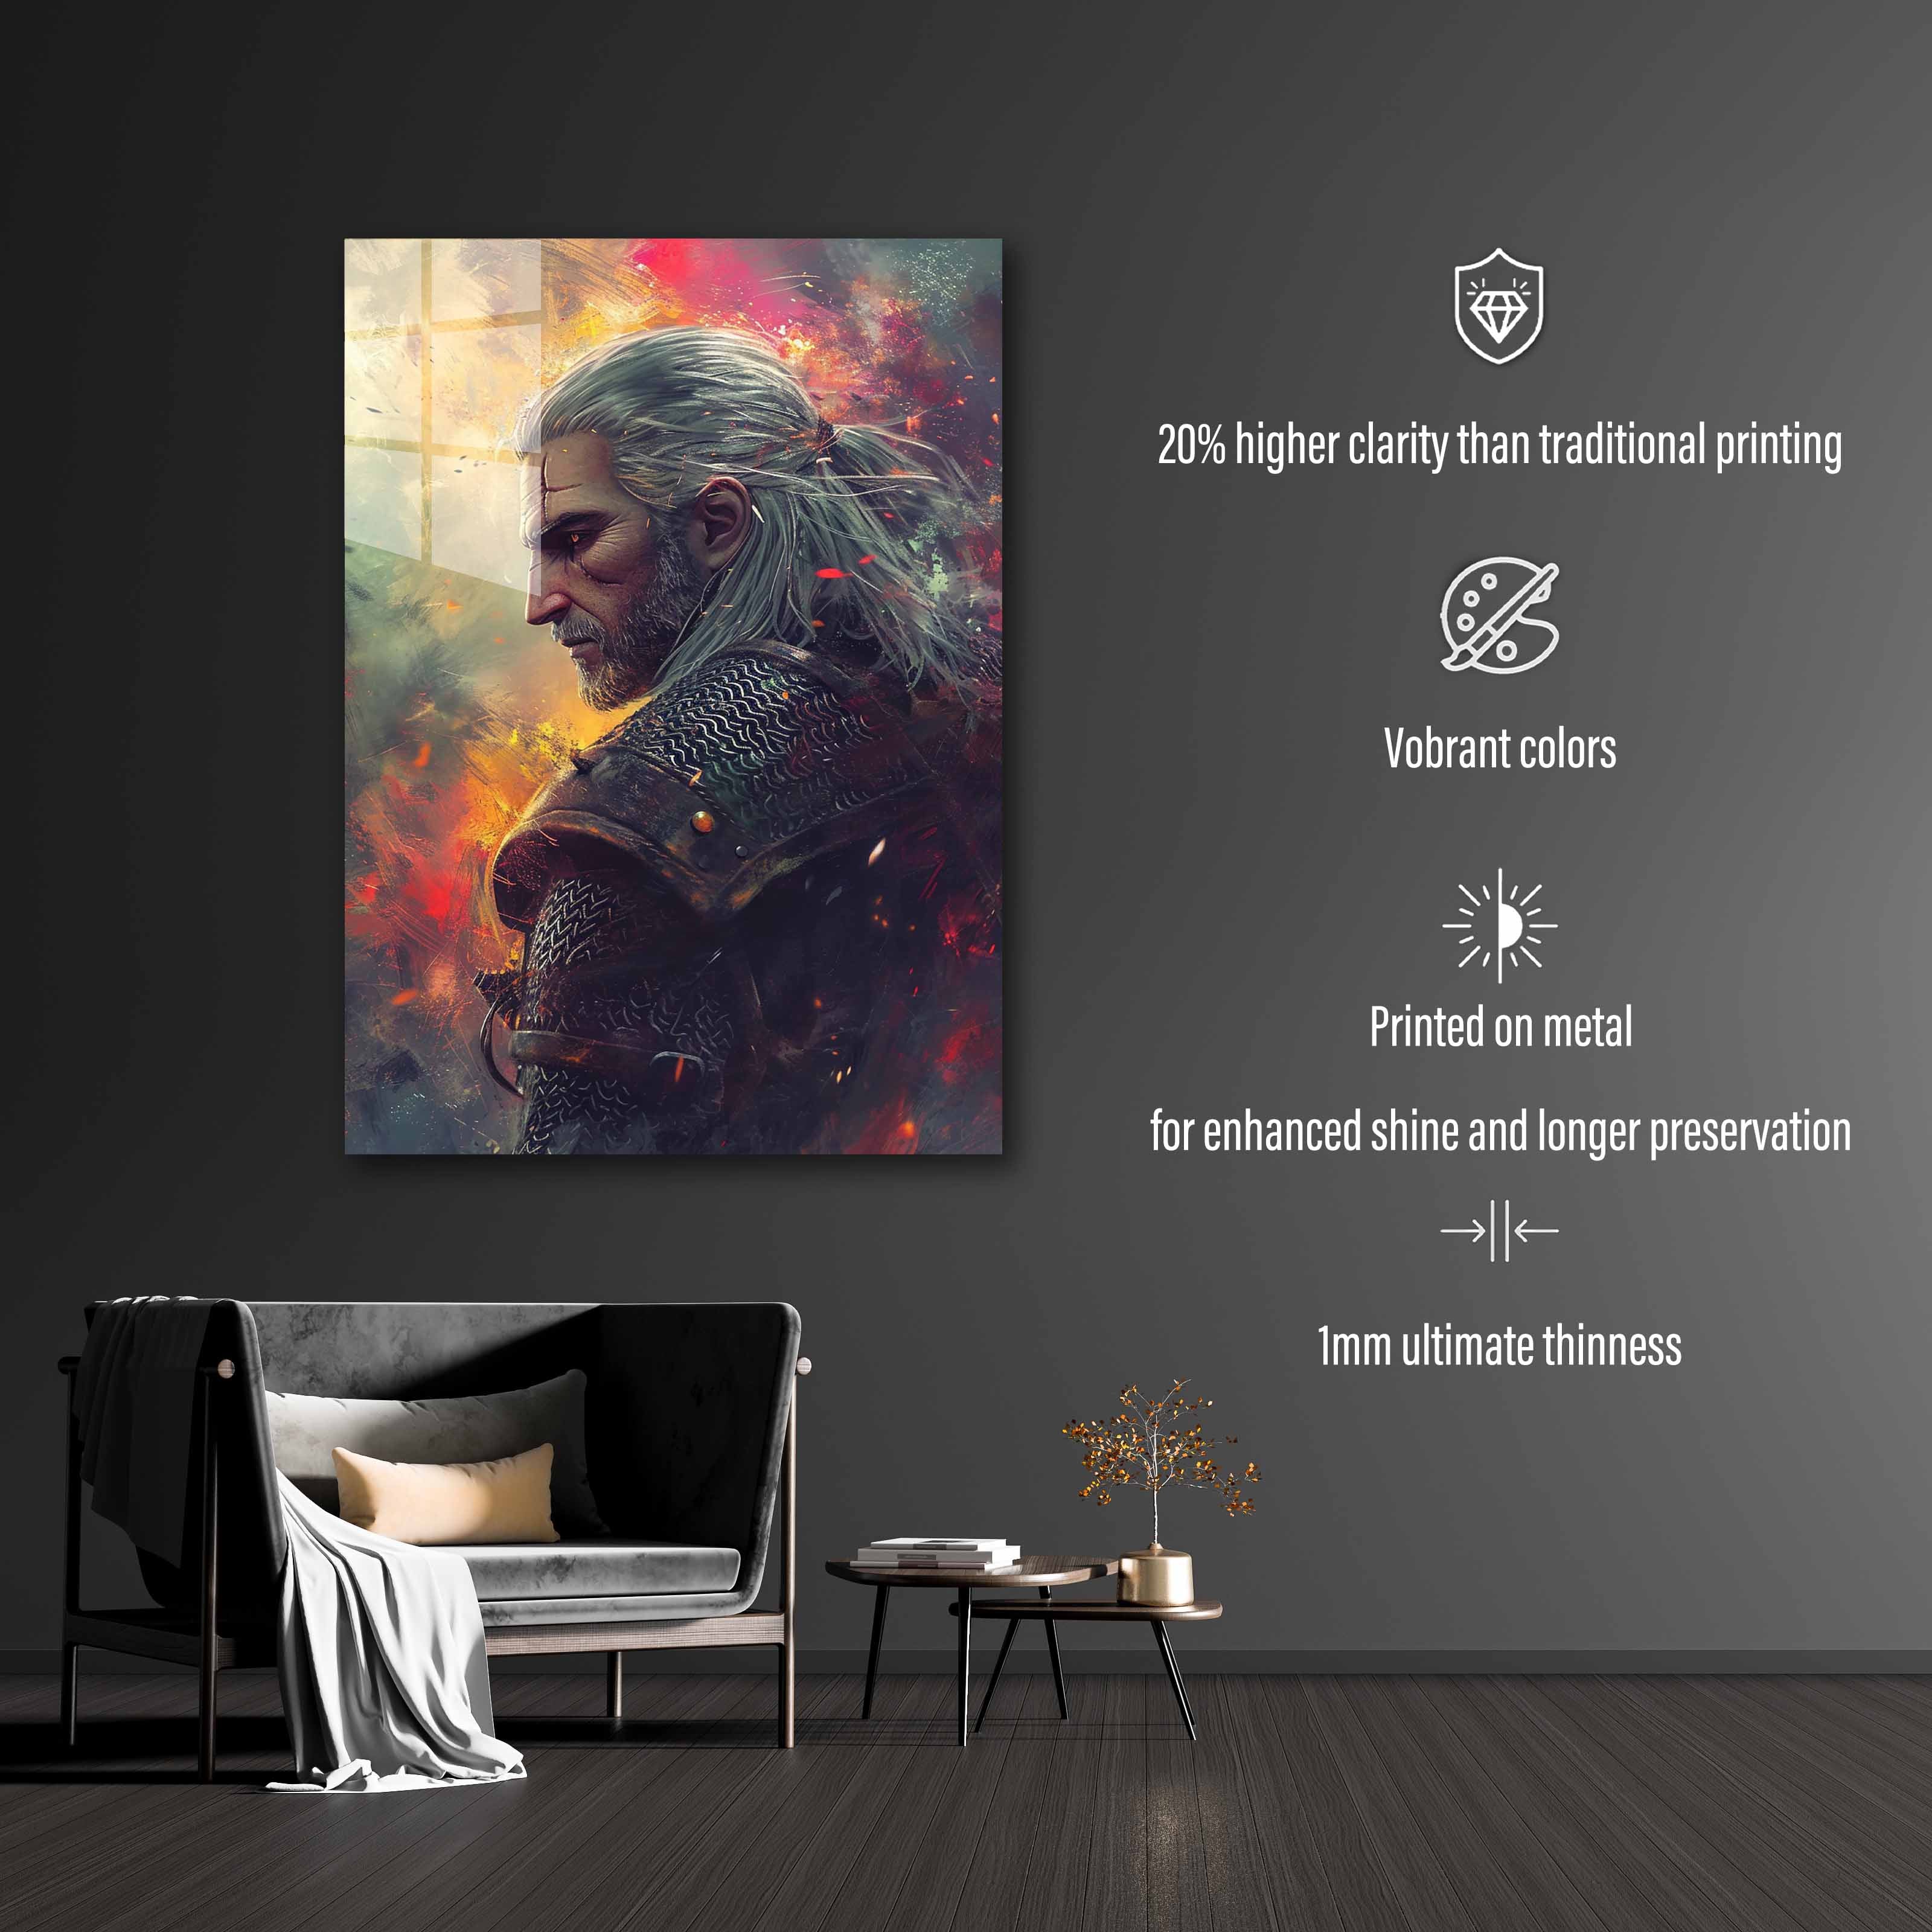 Geralt of Rivia X The Witcher-Artwork by @Pixalaxy